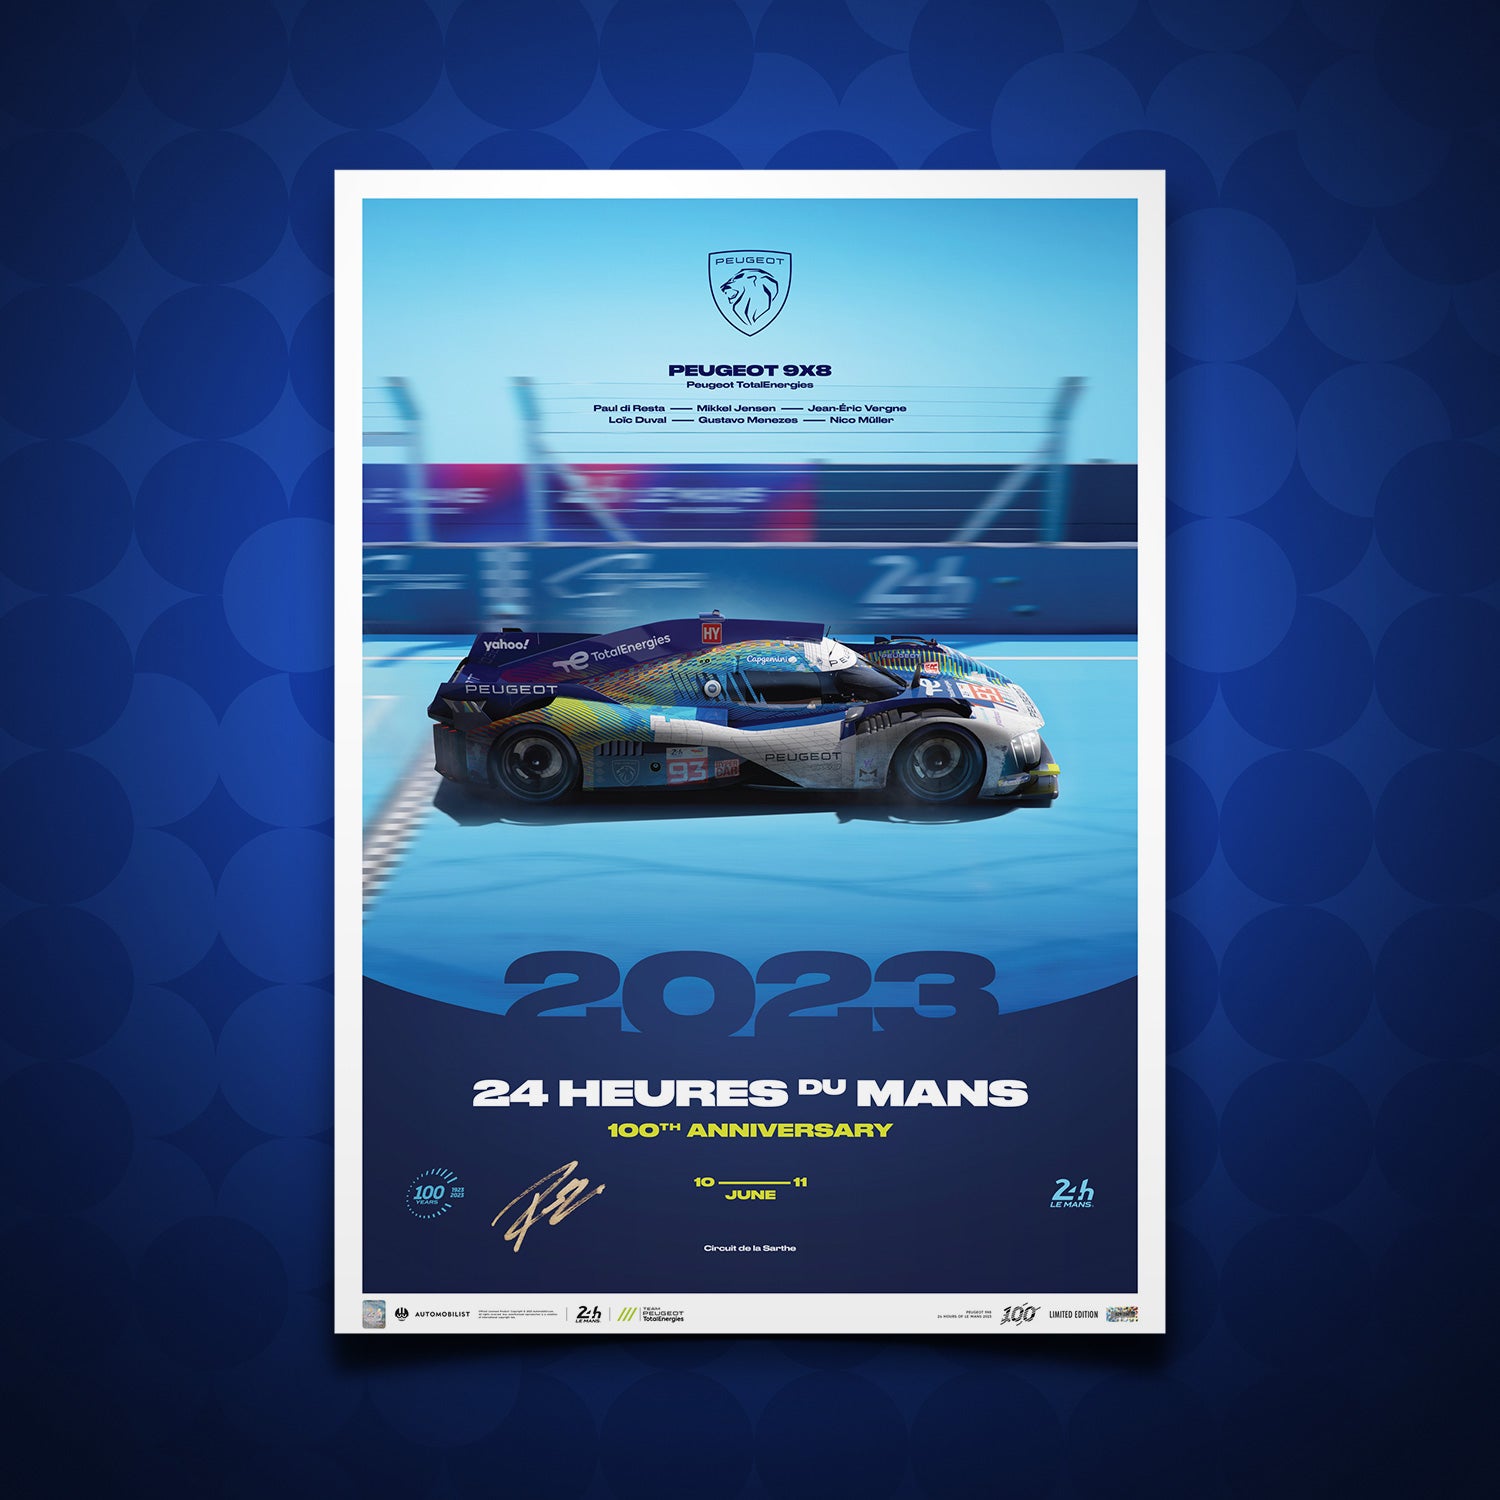 Signed by Paul di Resta - Peugeot 9X8 - 24h Le Mans - 100th Anniversary - 2023